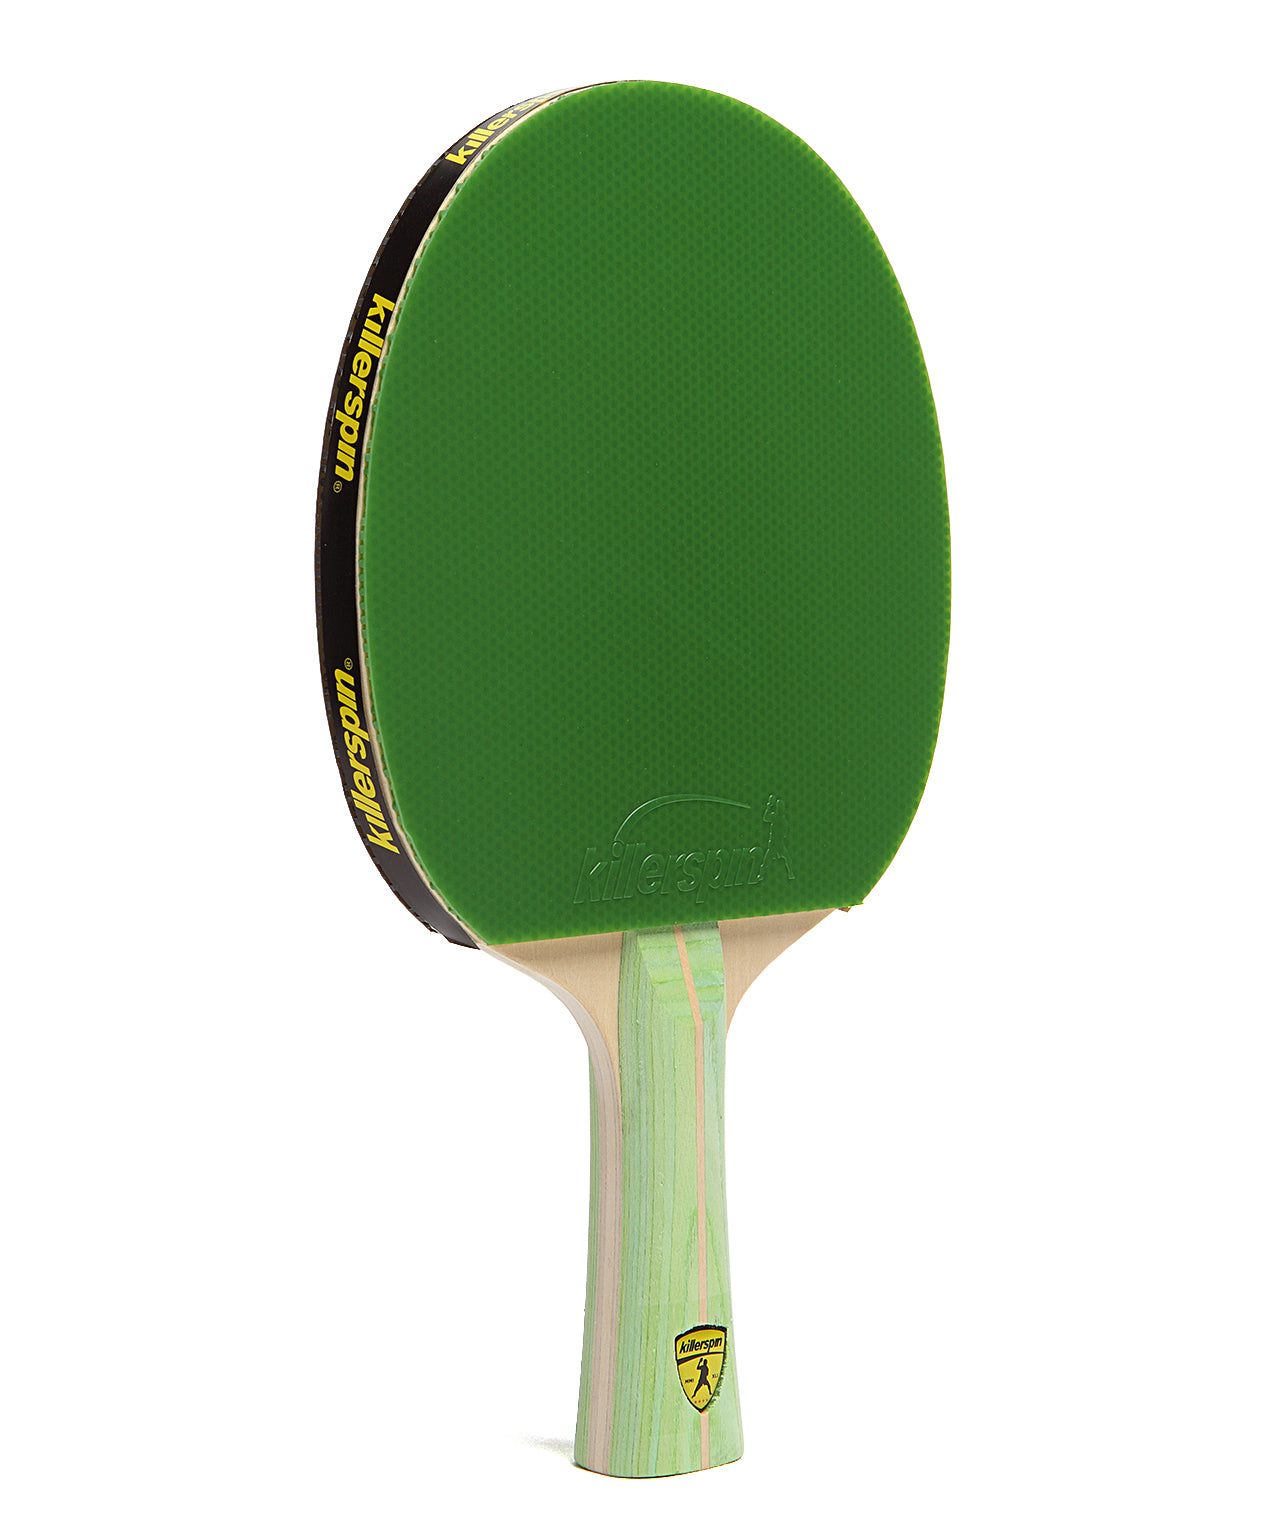 Killerspin Jet200 Table Tennis Paddle Ping Pong Play Mocha for